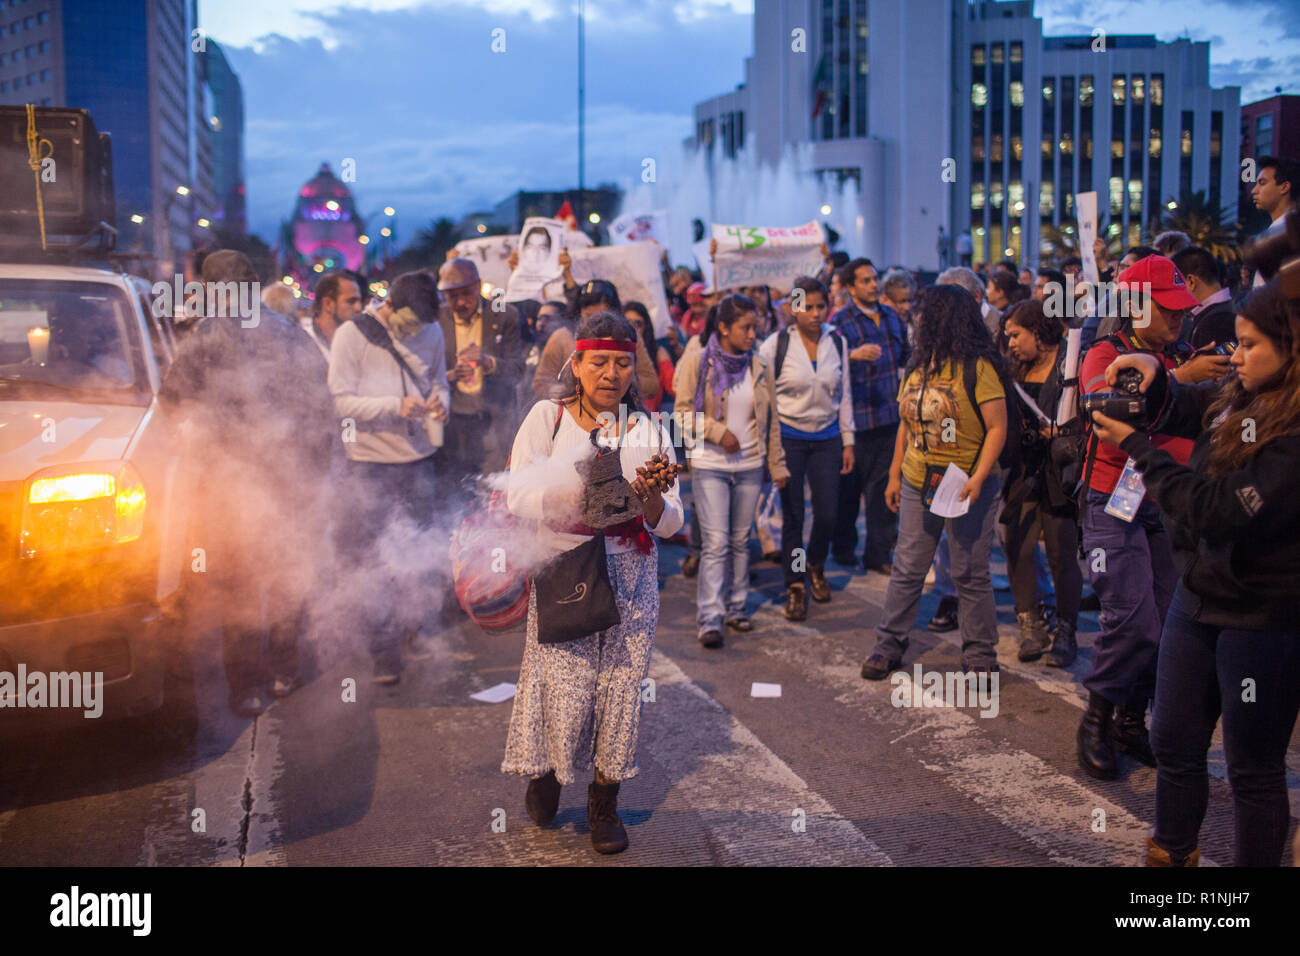 People march through Mexico City during the 'Global Day of Action for Ayotzinapa' Wednesday, October 23, 2014.  The march was held to demand answers following the killing of three students and the disappearance of 43 more in the city of  Ayotzinapa, Guerrero, which is South West of Mexico City.  The students have been missing since September 26, 2014 and the local mayor and his wife are accused of ordering the kidnappings and killings. The local police are also accused of working with  the Guerreros Unidos cartel in the crimes.   Since September 26, many mass graves have been located in the ar Stock Photo